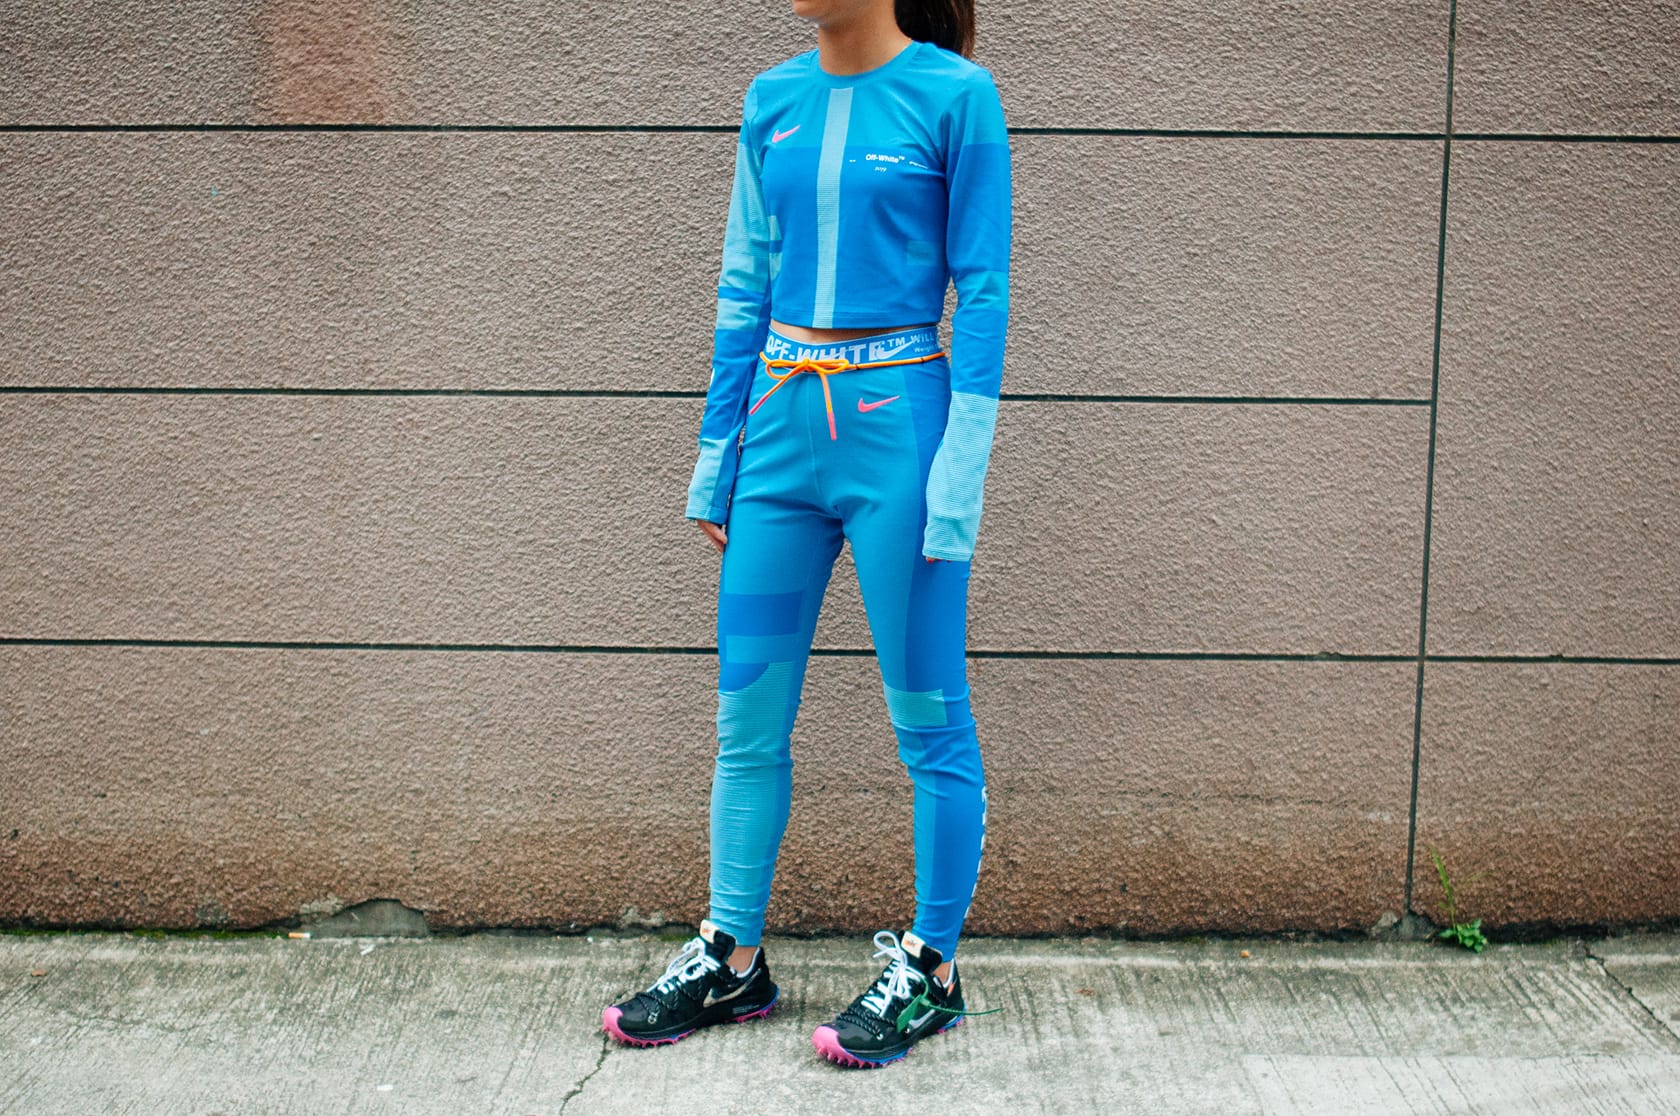 off white nike blue outfit